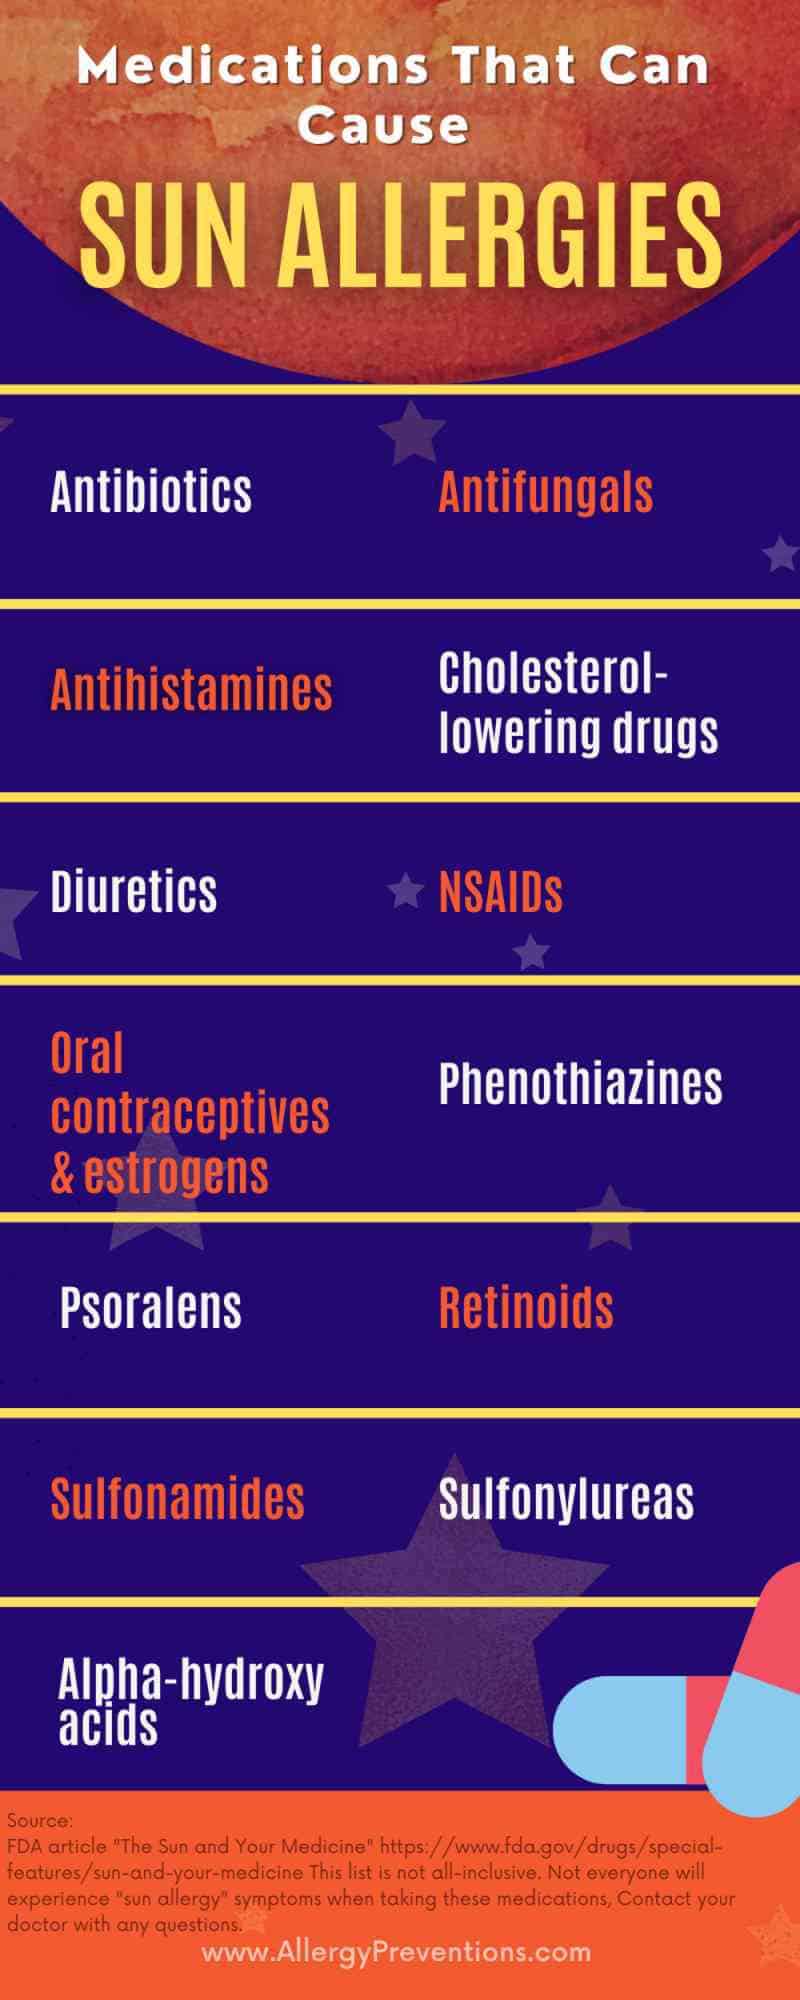 medications that can cause sun allergies infographic - antibiotics, antifungals, antihistamines, cholesterol-lowering drugs, diuretics, NSAIDs, oral contraceptives & estrogen, phenothiazines, psoralens, retinoids, sulfonamides, sulfonylureas, alpha-hydroxy acids. source of information is fda.gov. visual provided by allergypreventions.com